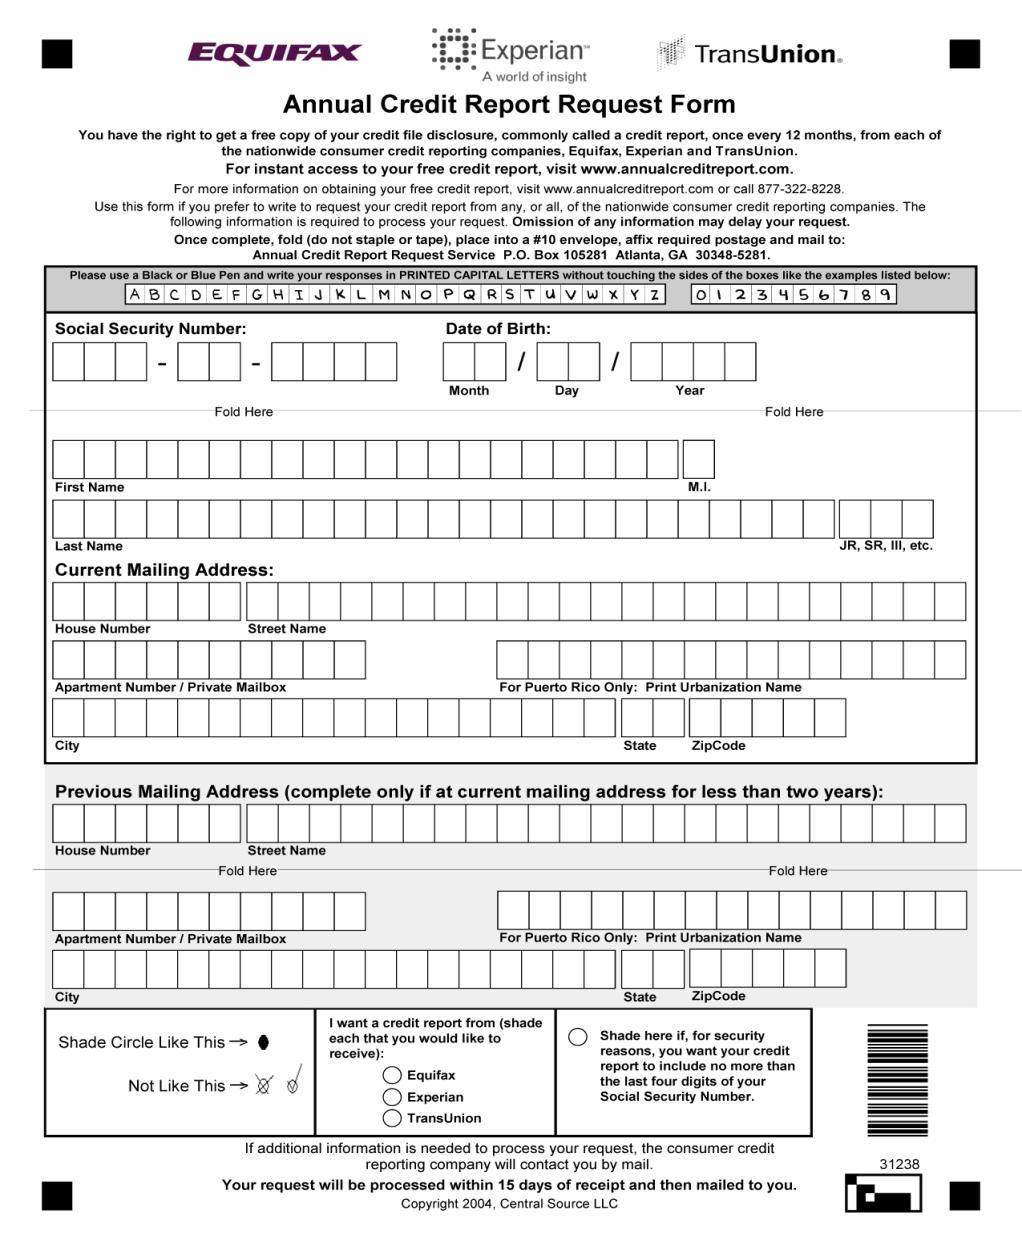 Annual Credit Report Request Form You can complete and submit the Annual Credit Report Request form